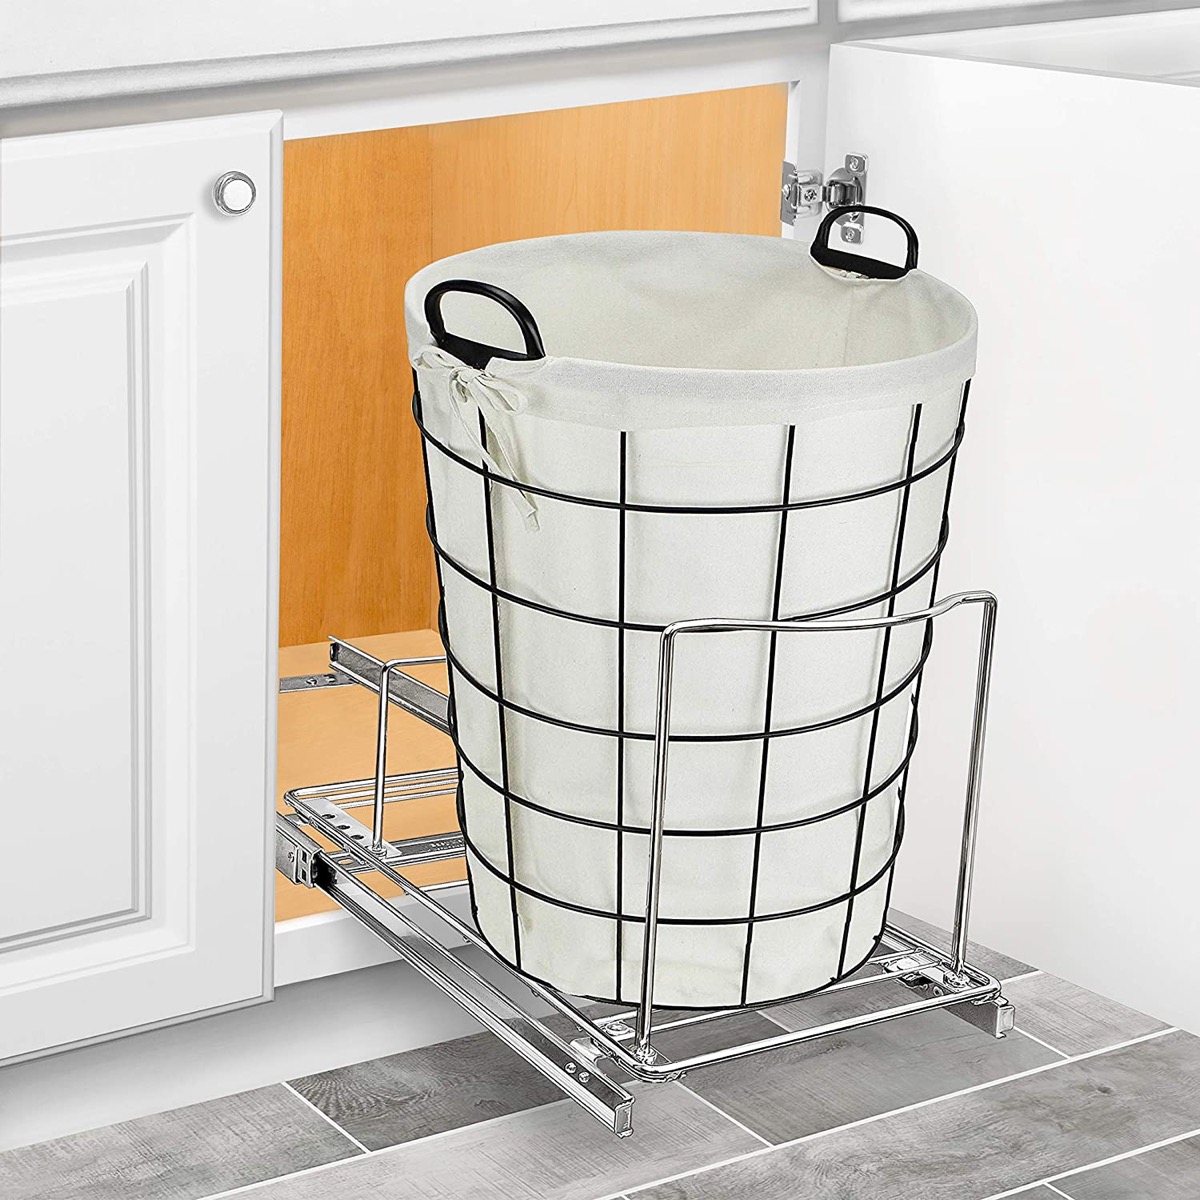 In-cabinet trash can roller